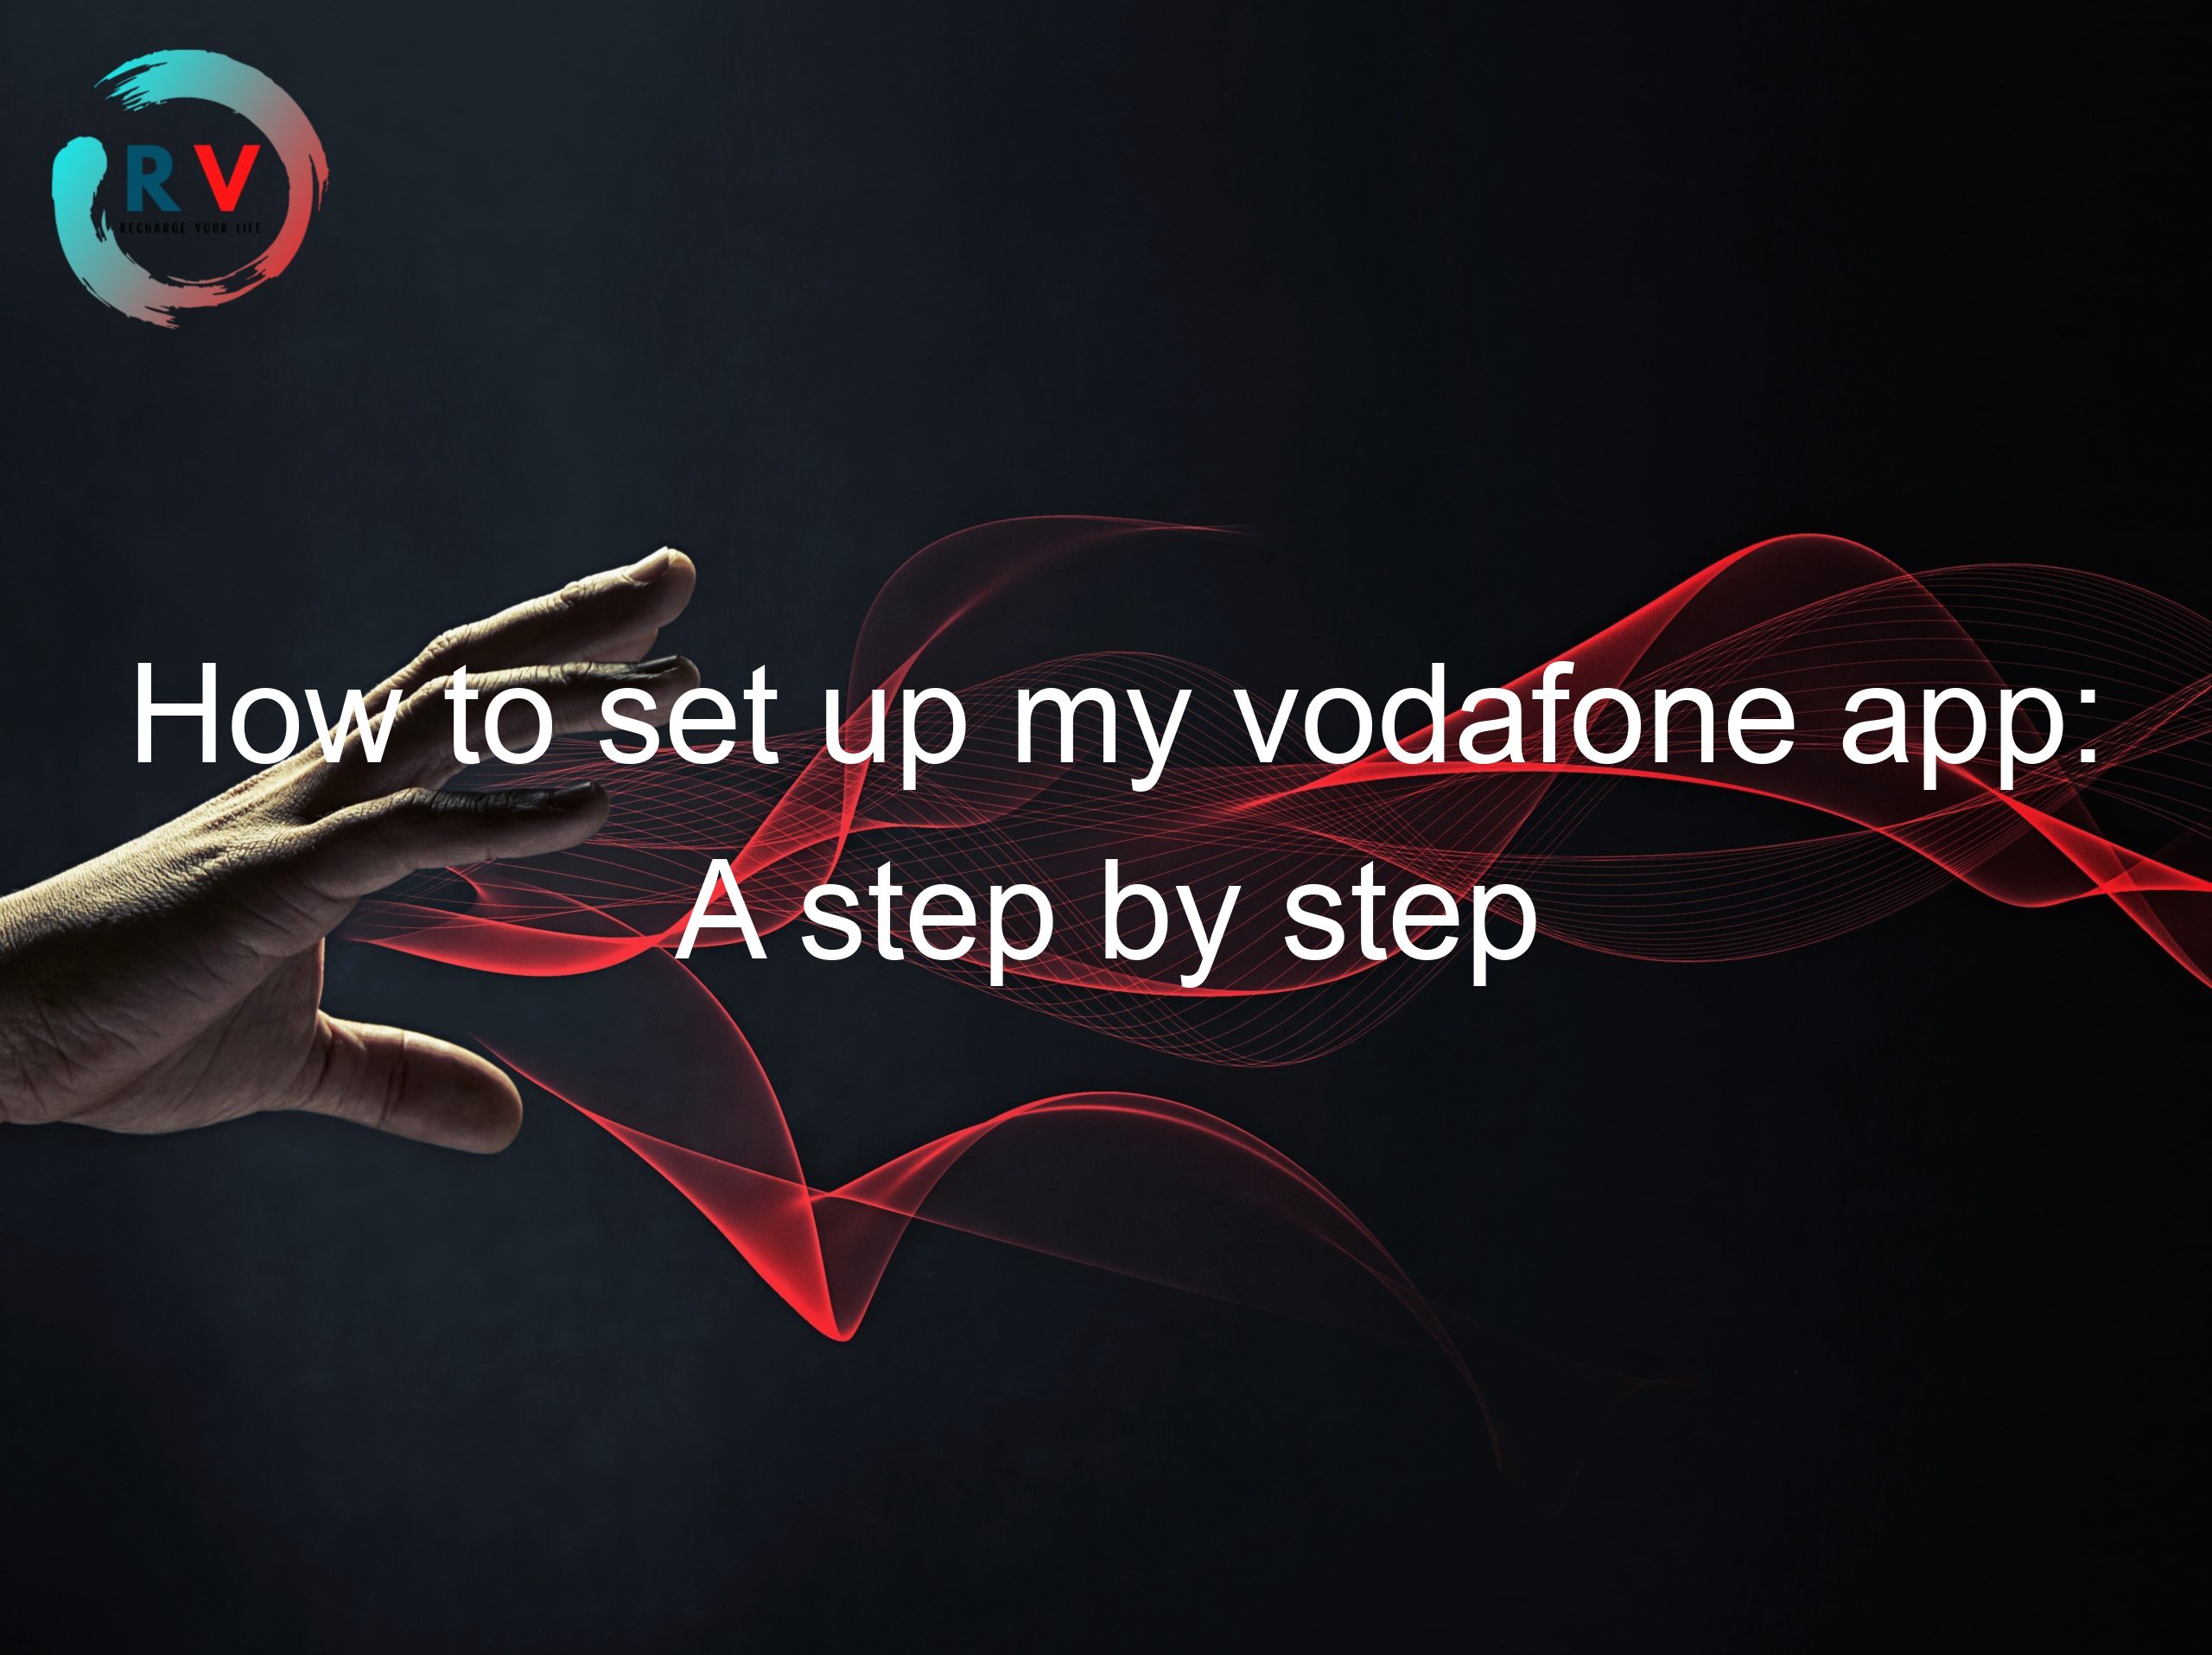 How to set up my vodafone app: A step by step guide